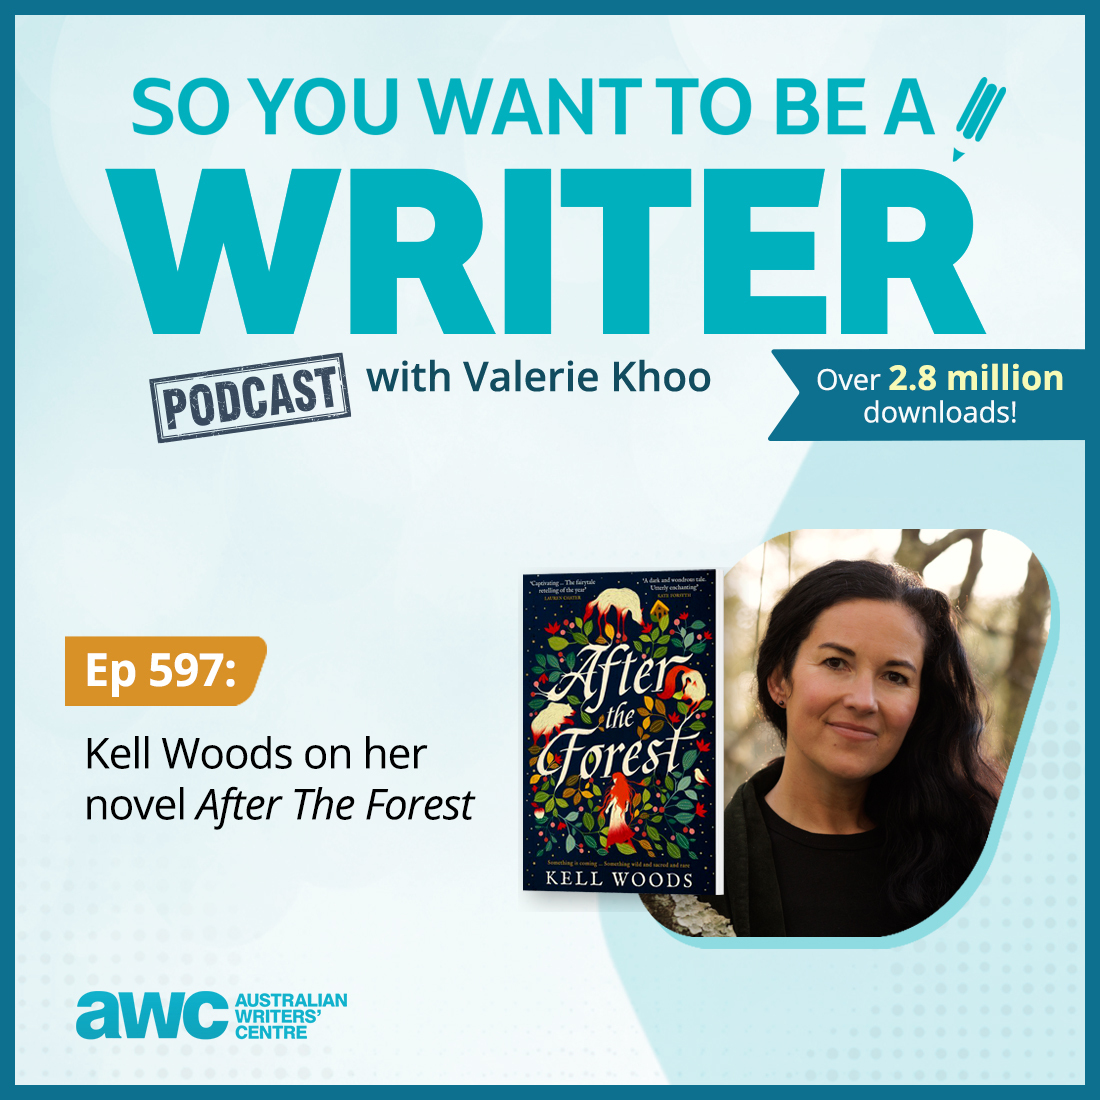 WRITER 597: Kell Woods on her novel ’After The Forest’.